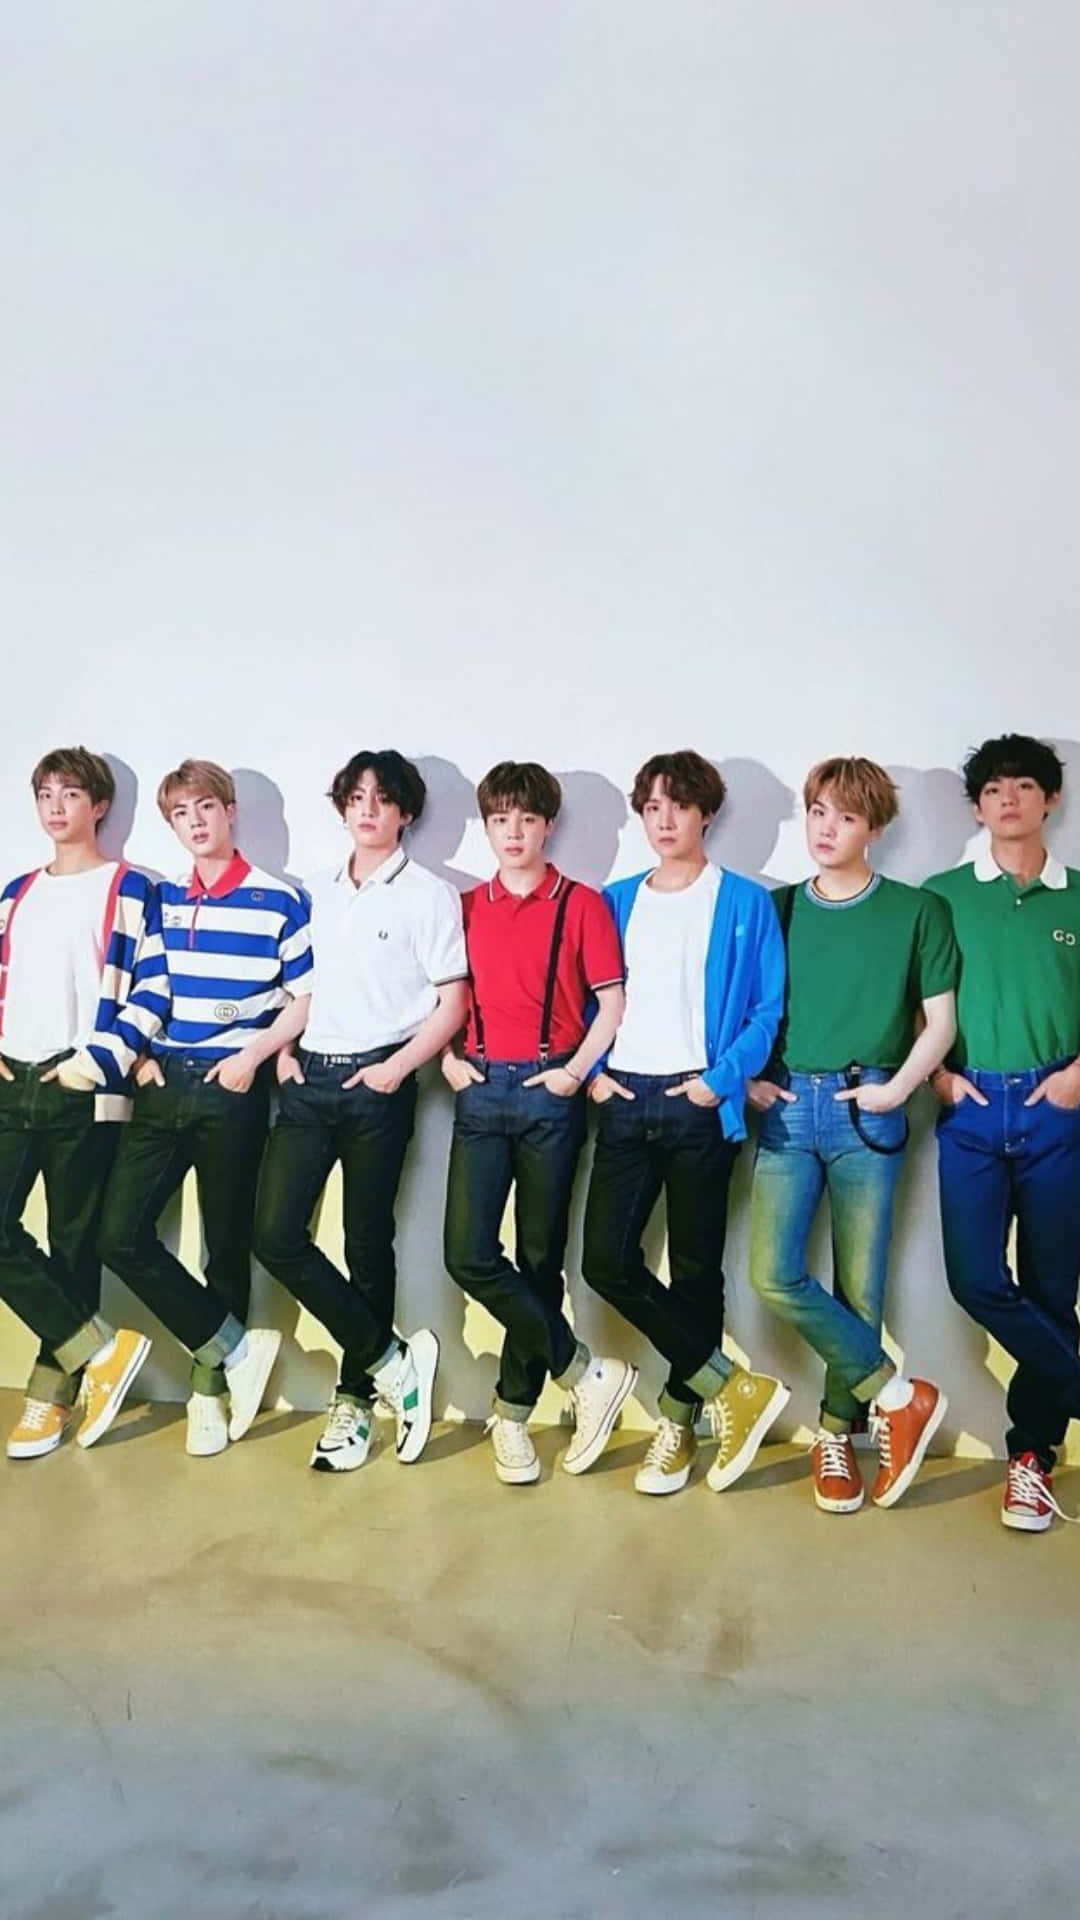 Colorful Casual Outfits BTS Photoshoot Wallpaper